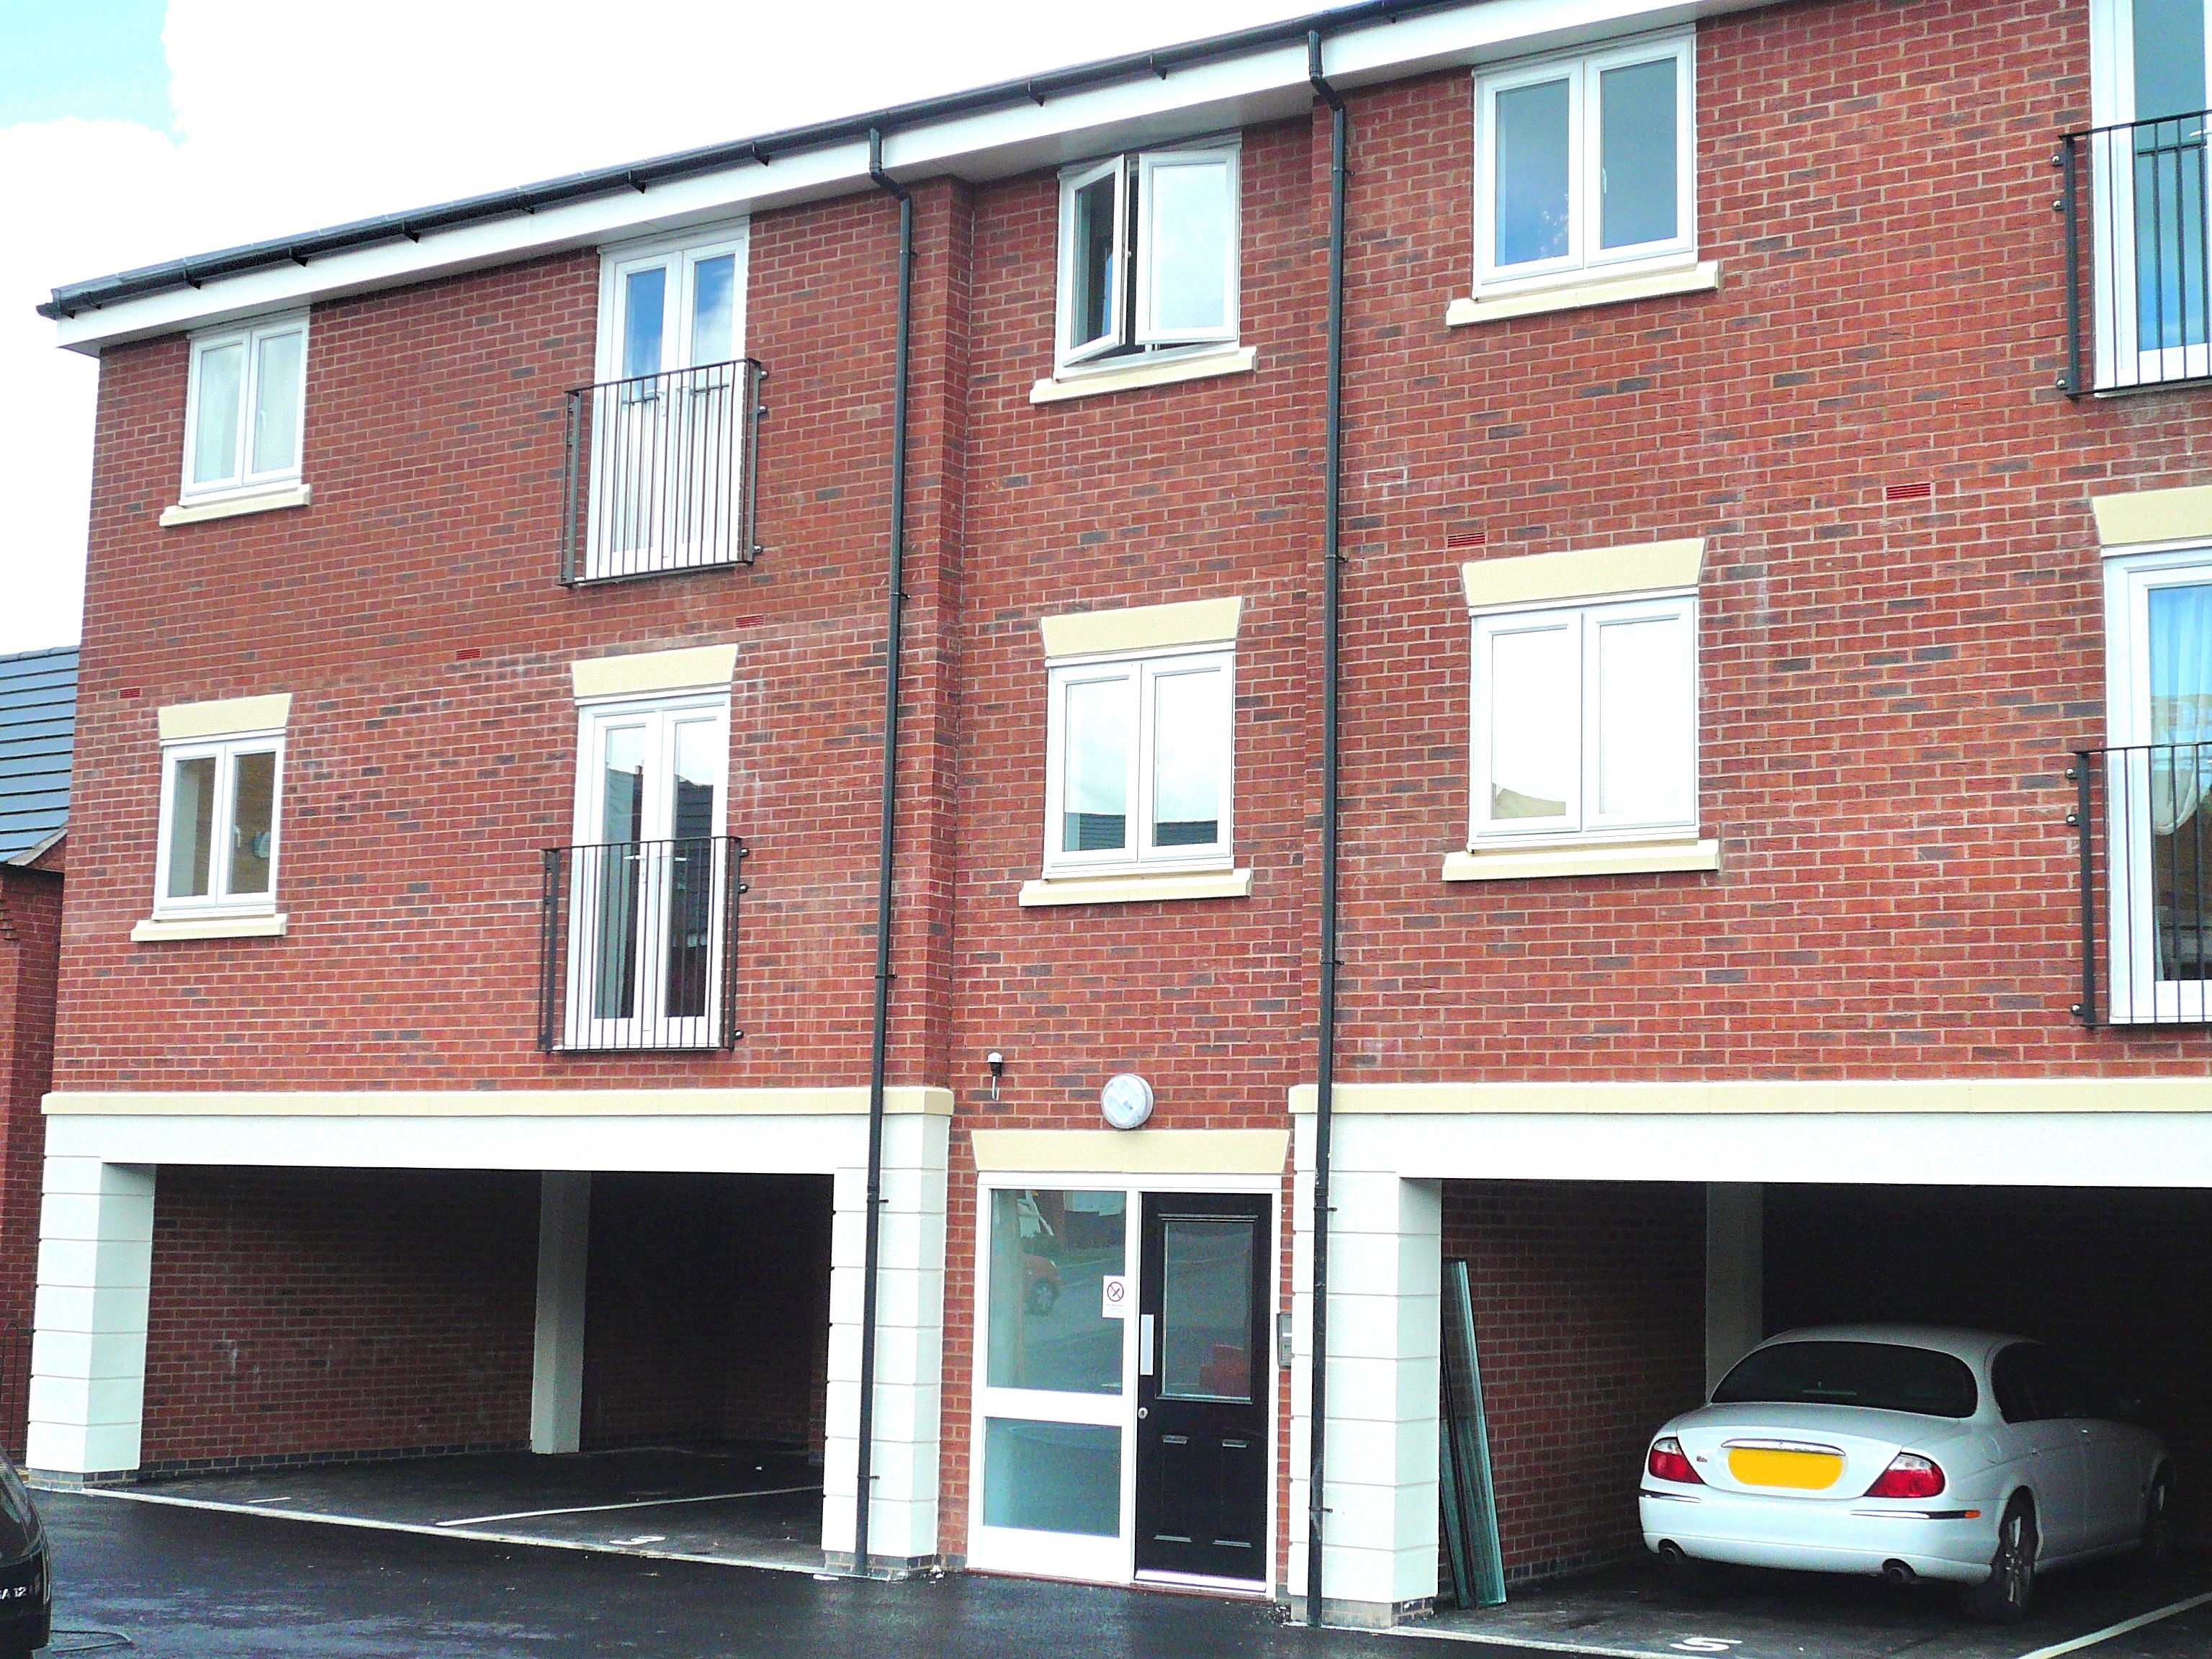 Southgate Way, Dudley, DY1